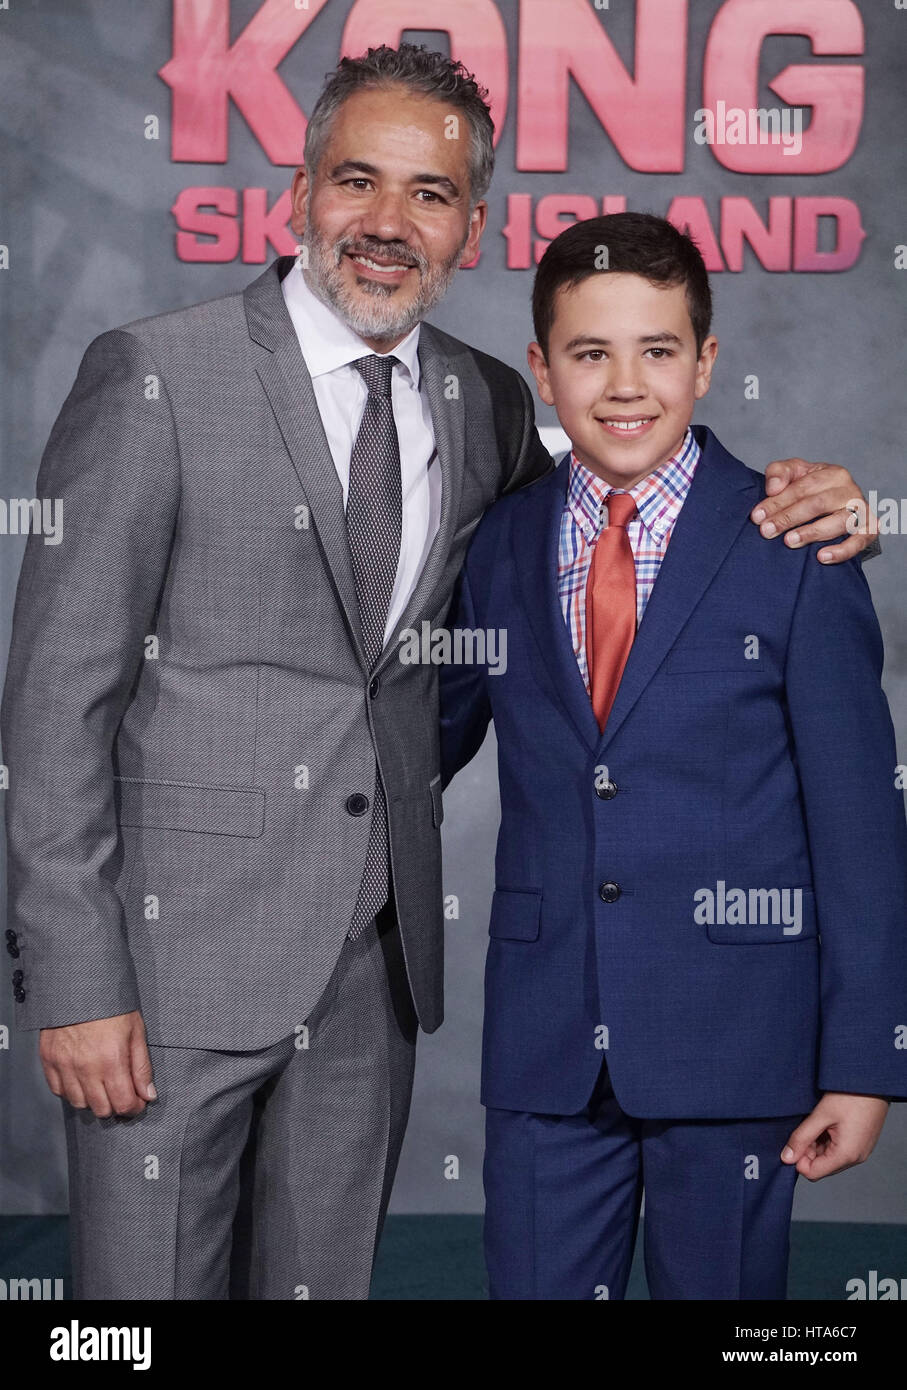 Los Angeles, USA. 08th Mar, 2017. John Ortiz and son at the Kong Skull Island Premiere at the Microsoft Theatre in Los Angeles. March 8, 2017. Credit: Tsuni/USA/Alamy Live News Stock Photo